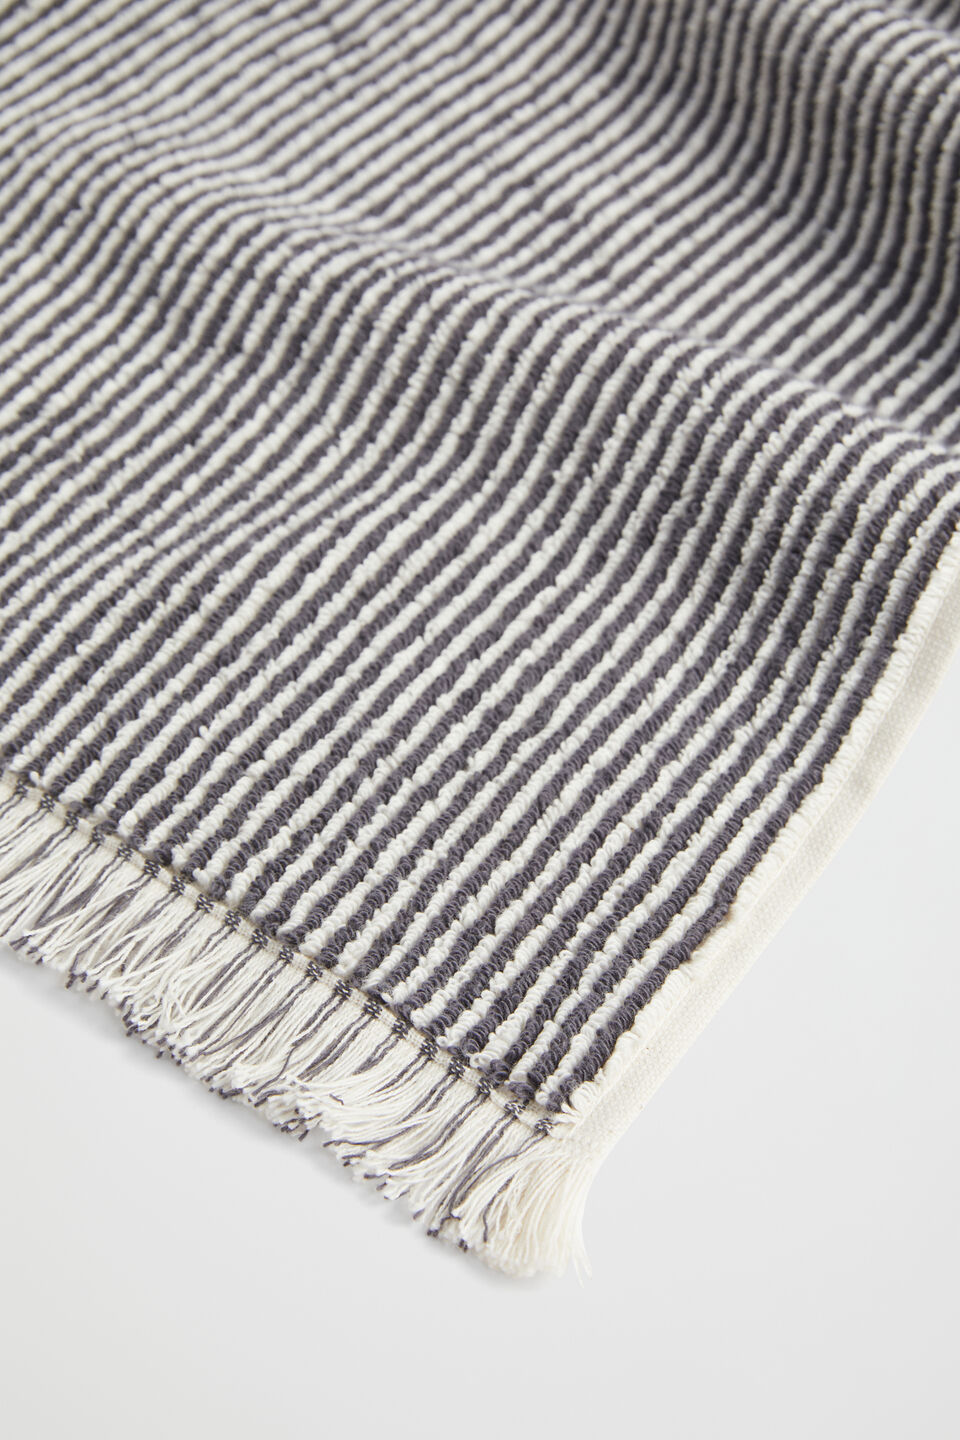 Stripe Textured Hand Towel  Charcoal